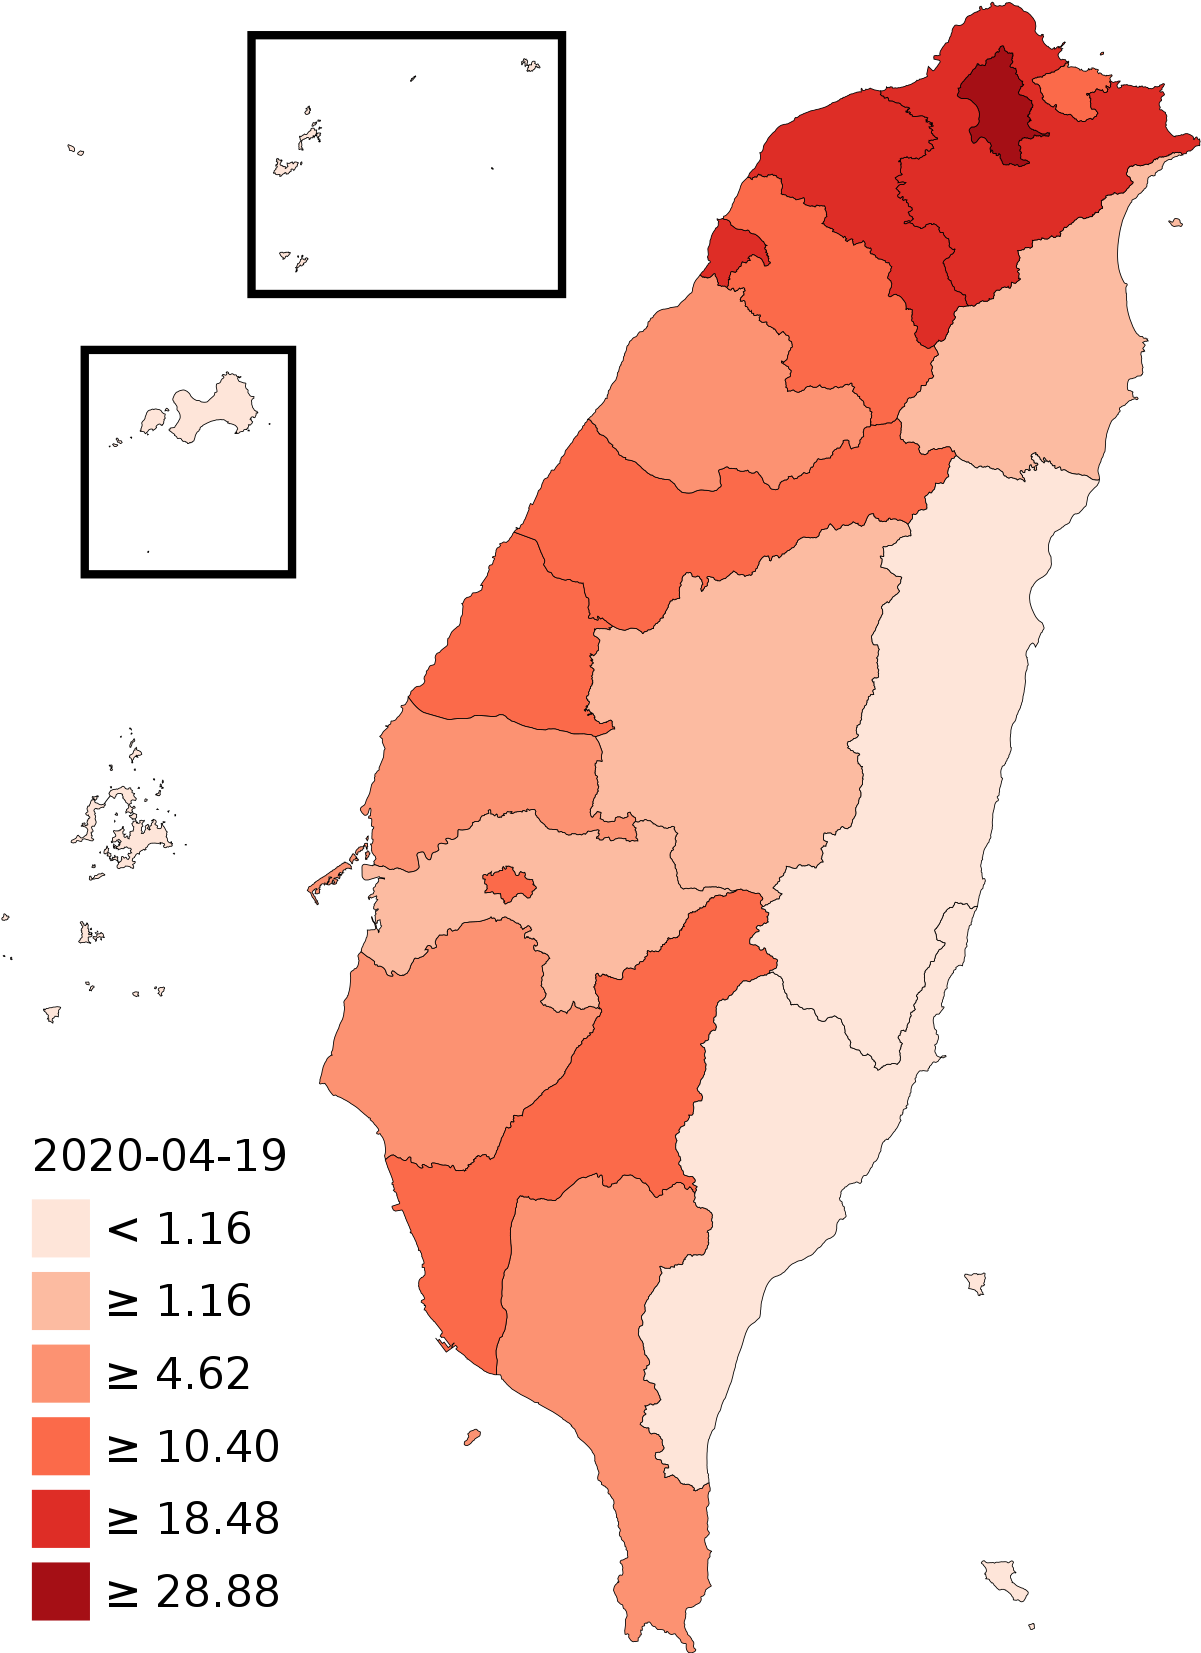 A Map Of Taiwan With Different Shades Of Red